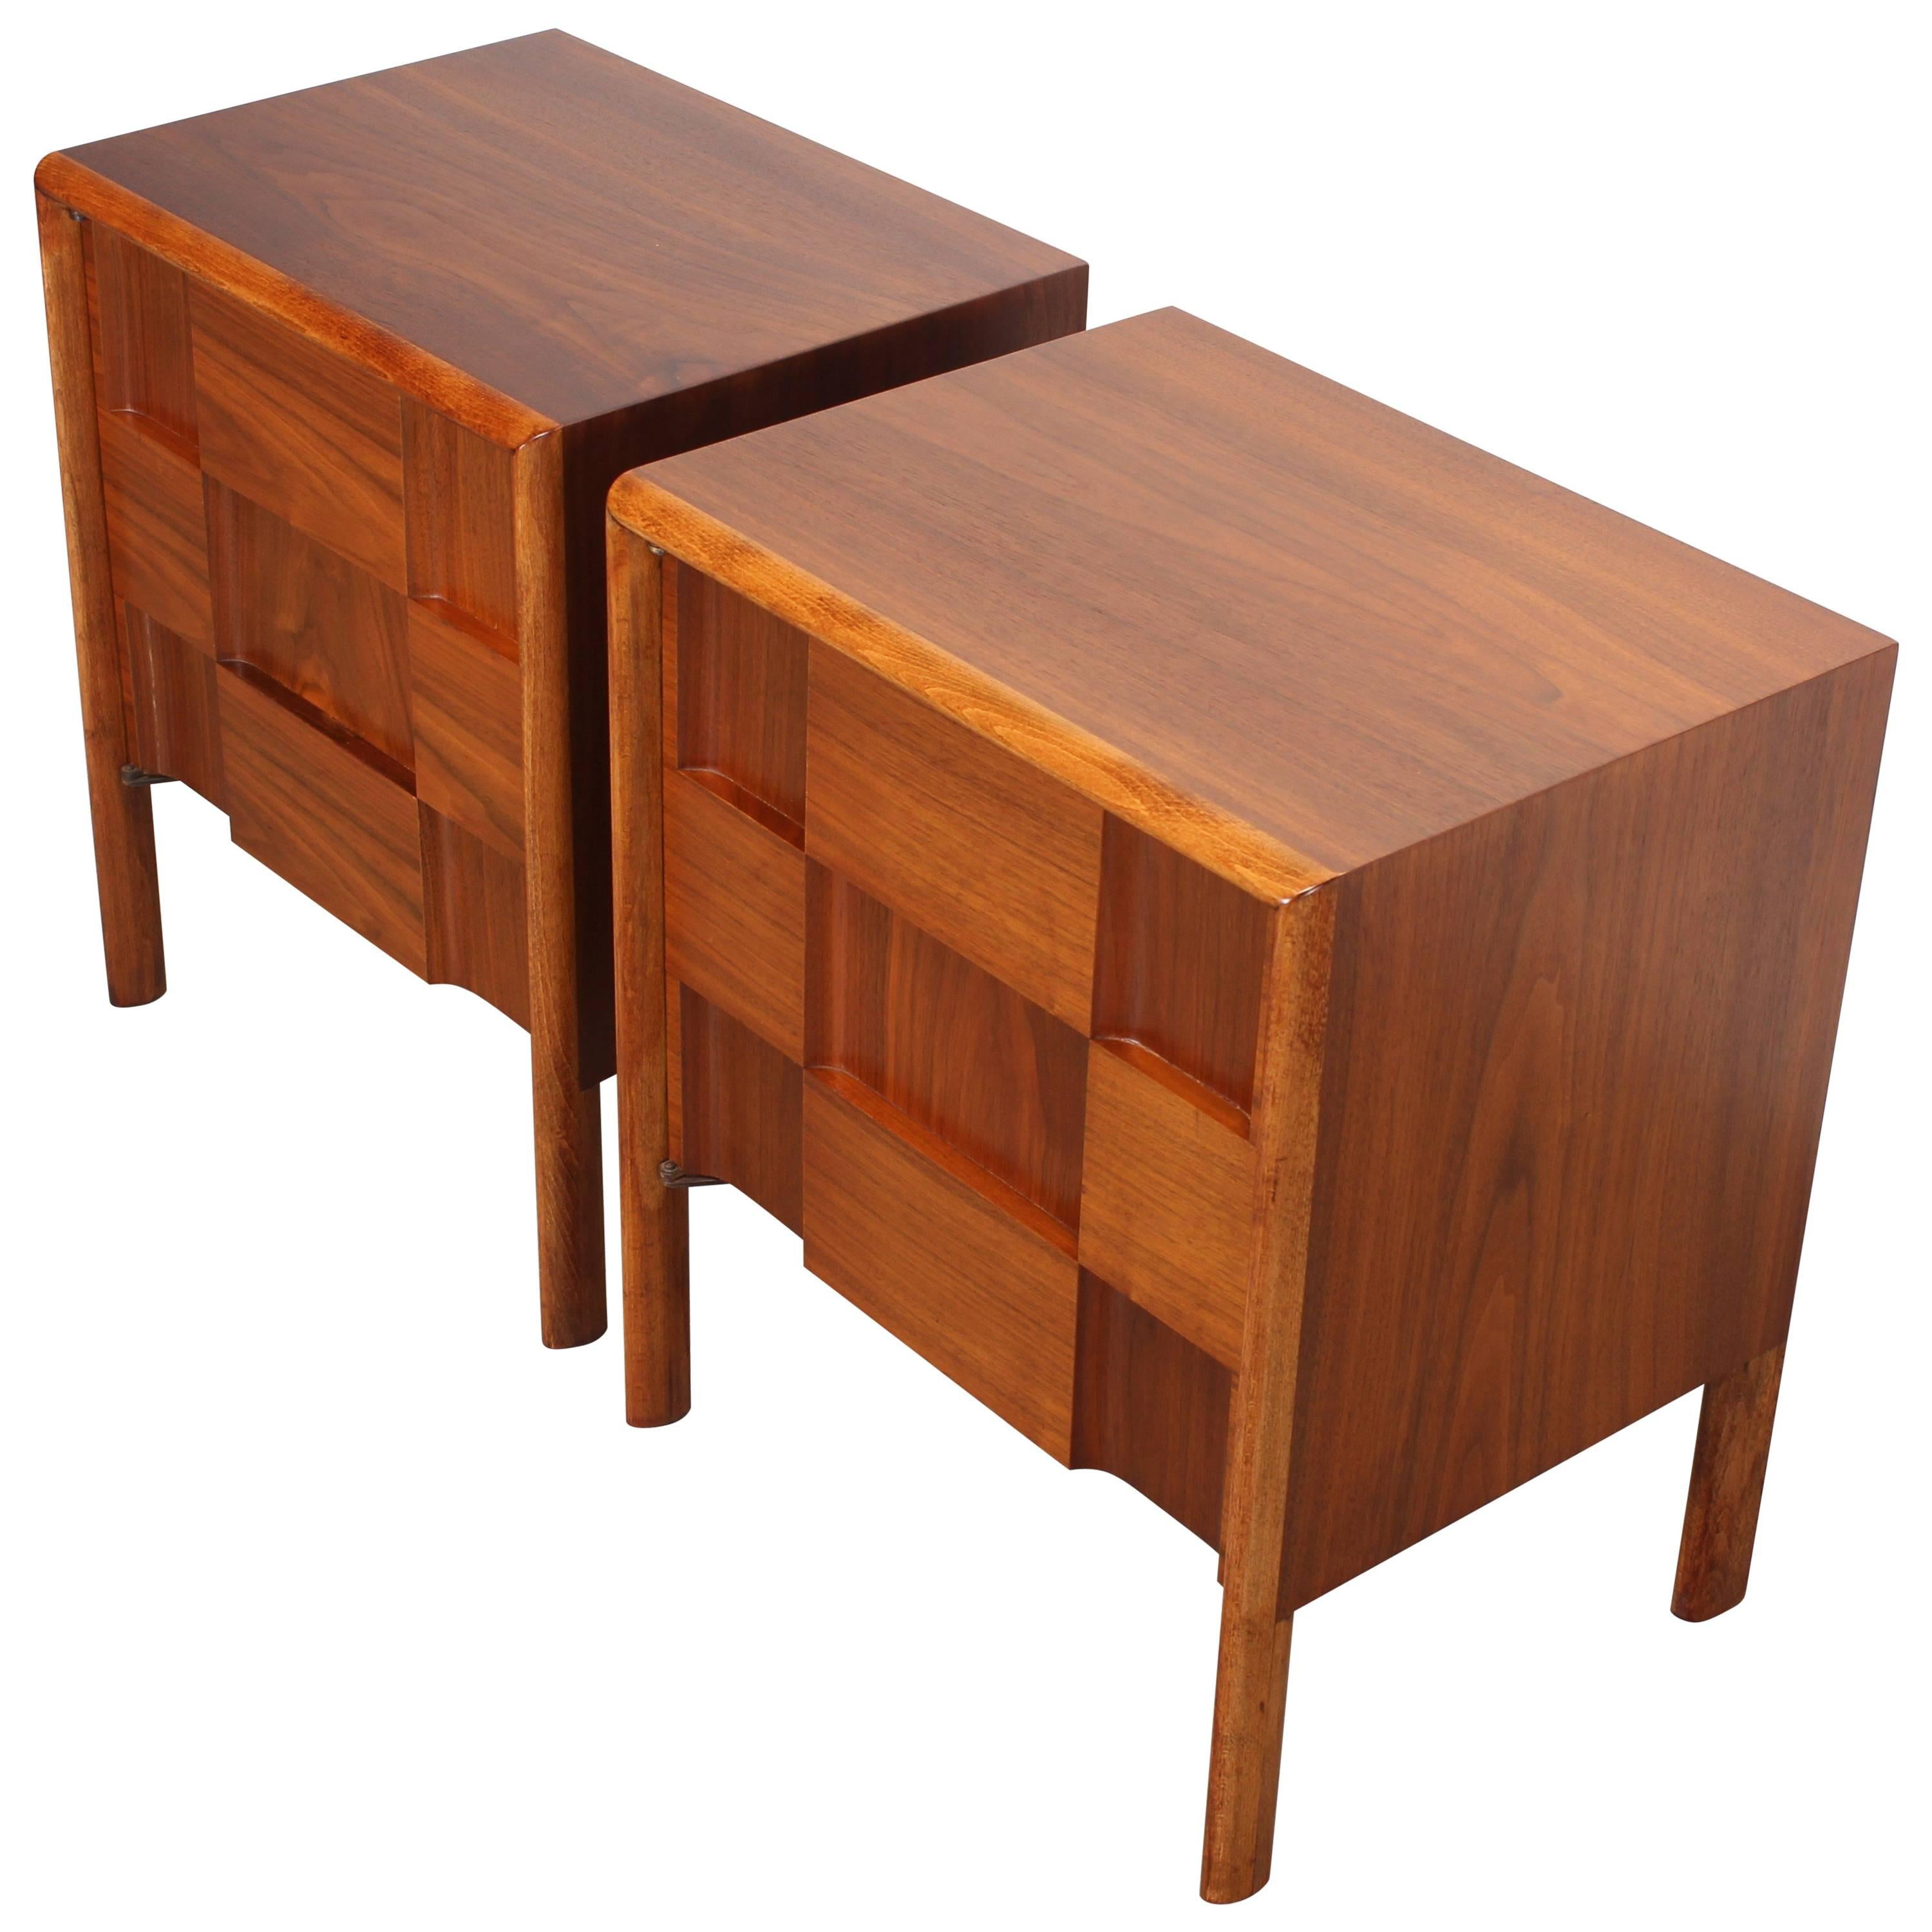 Pair of Edmond Spence nightstands, end tables, made in Sweden. Edmond Spence was an American designer who was influenced by Danish Modernism in  the late 1950's.

Very good condition age appropriate wear, ready to be used. Slight blemish to top